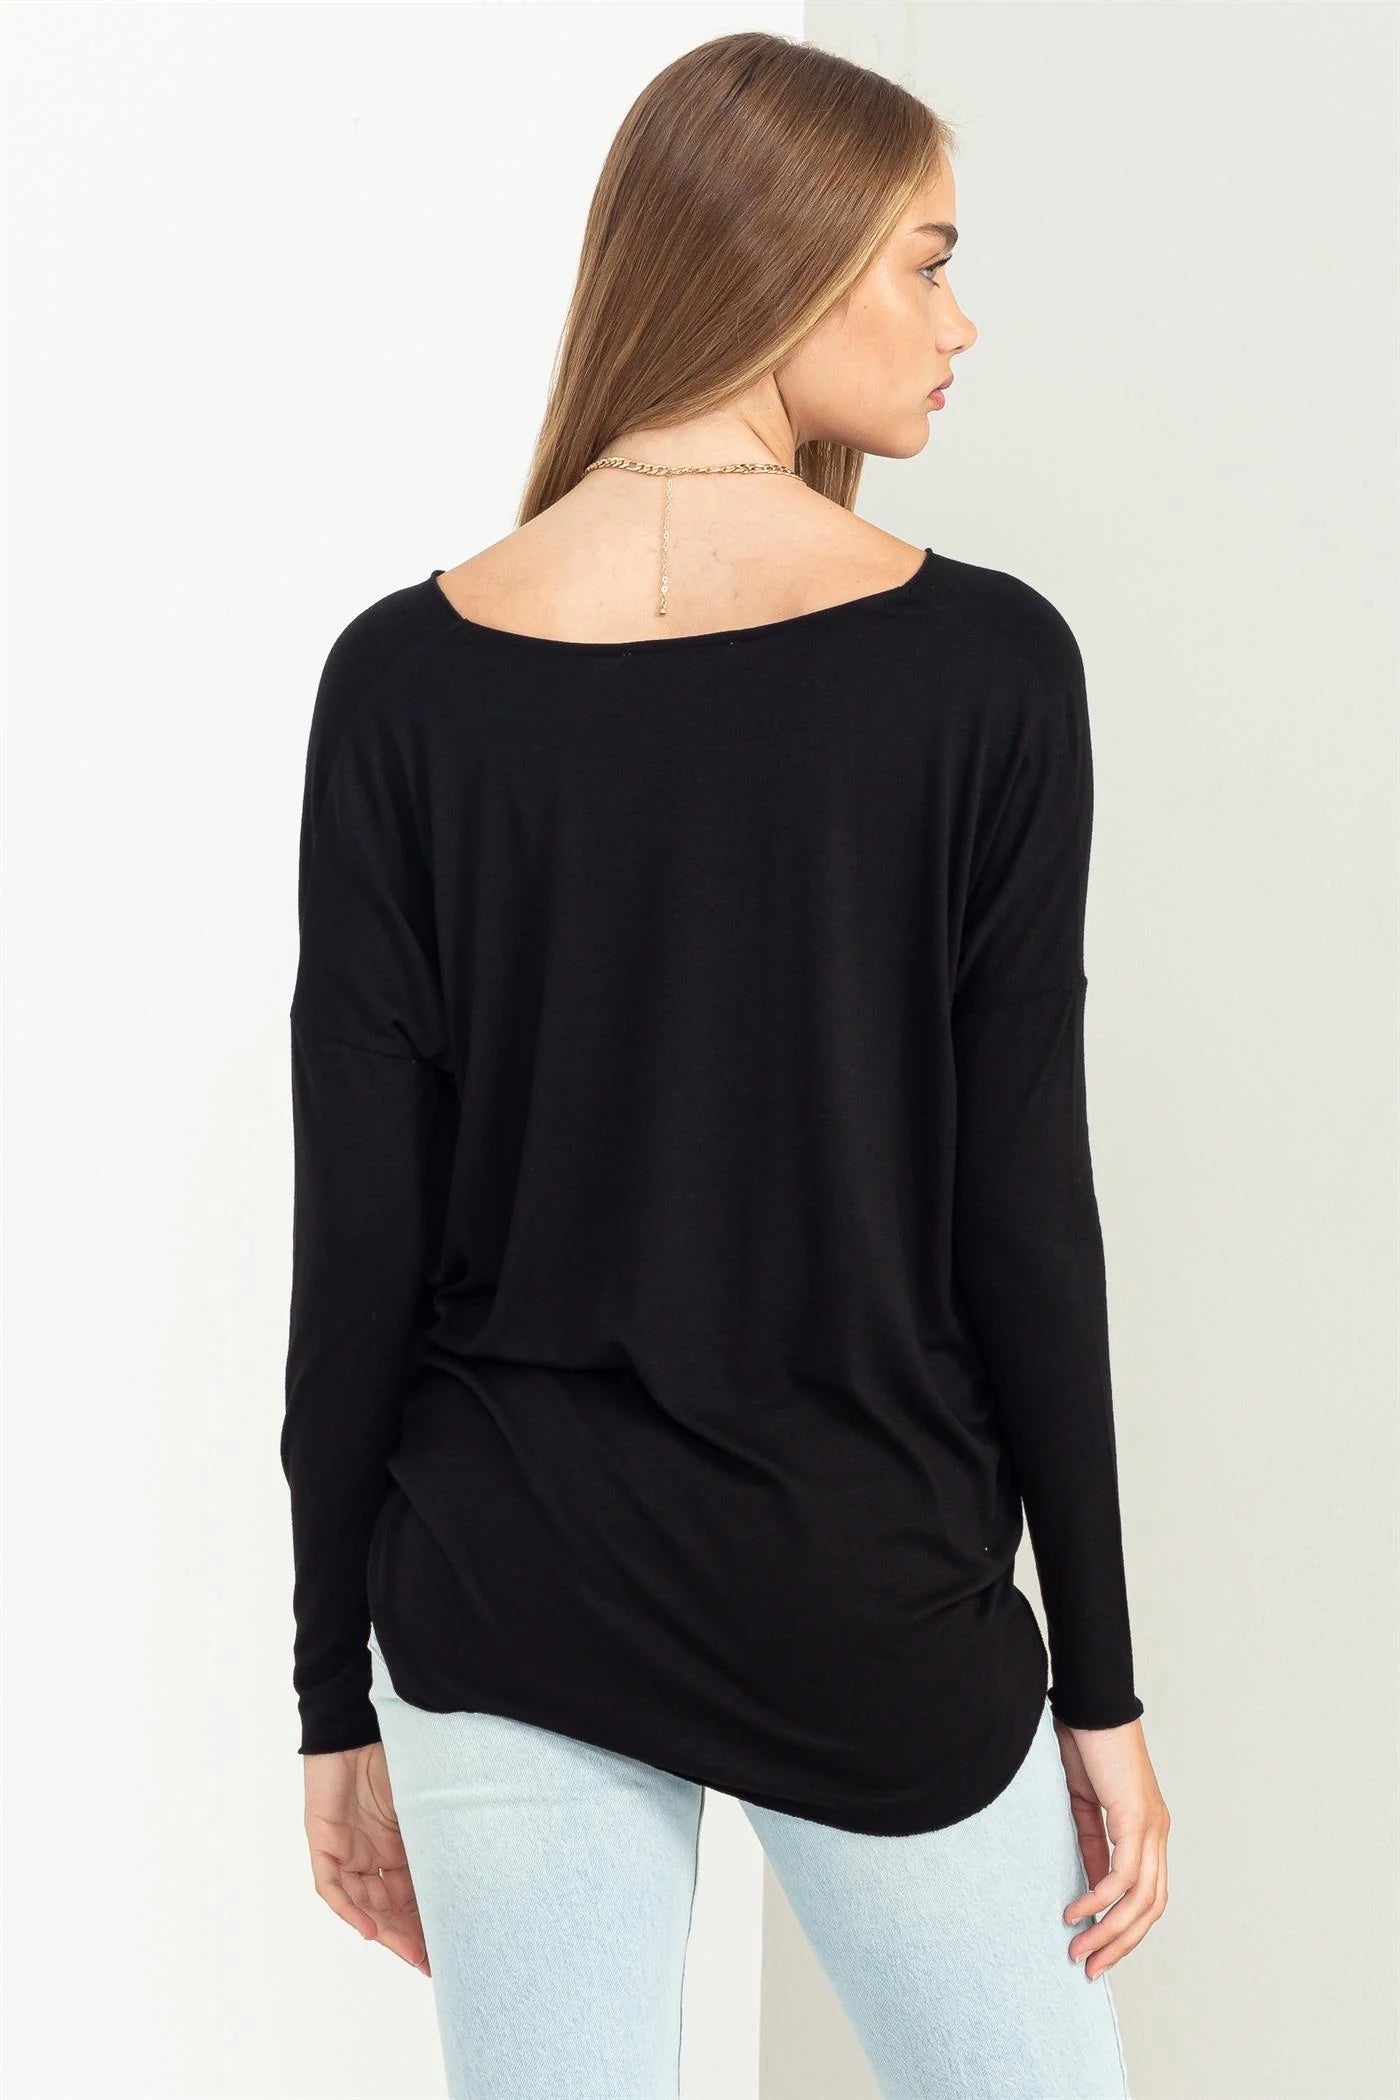 Enticing Endeavors Long Sleeve